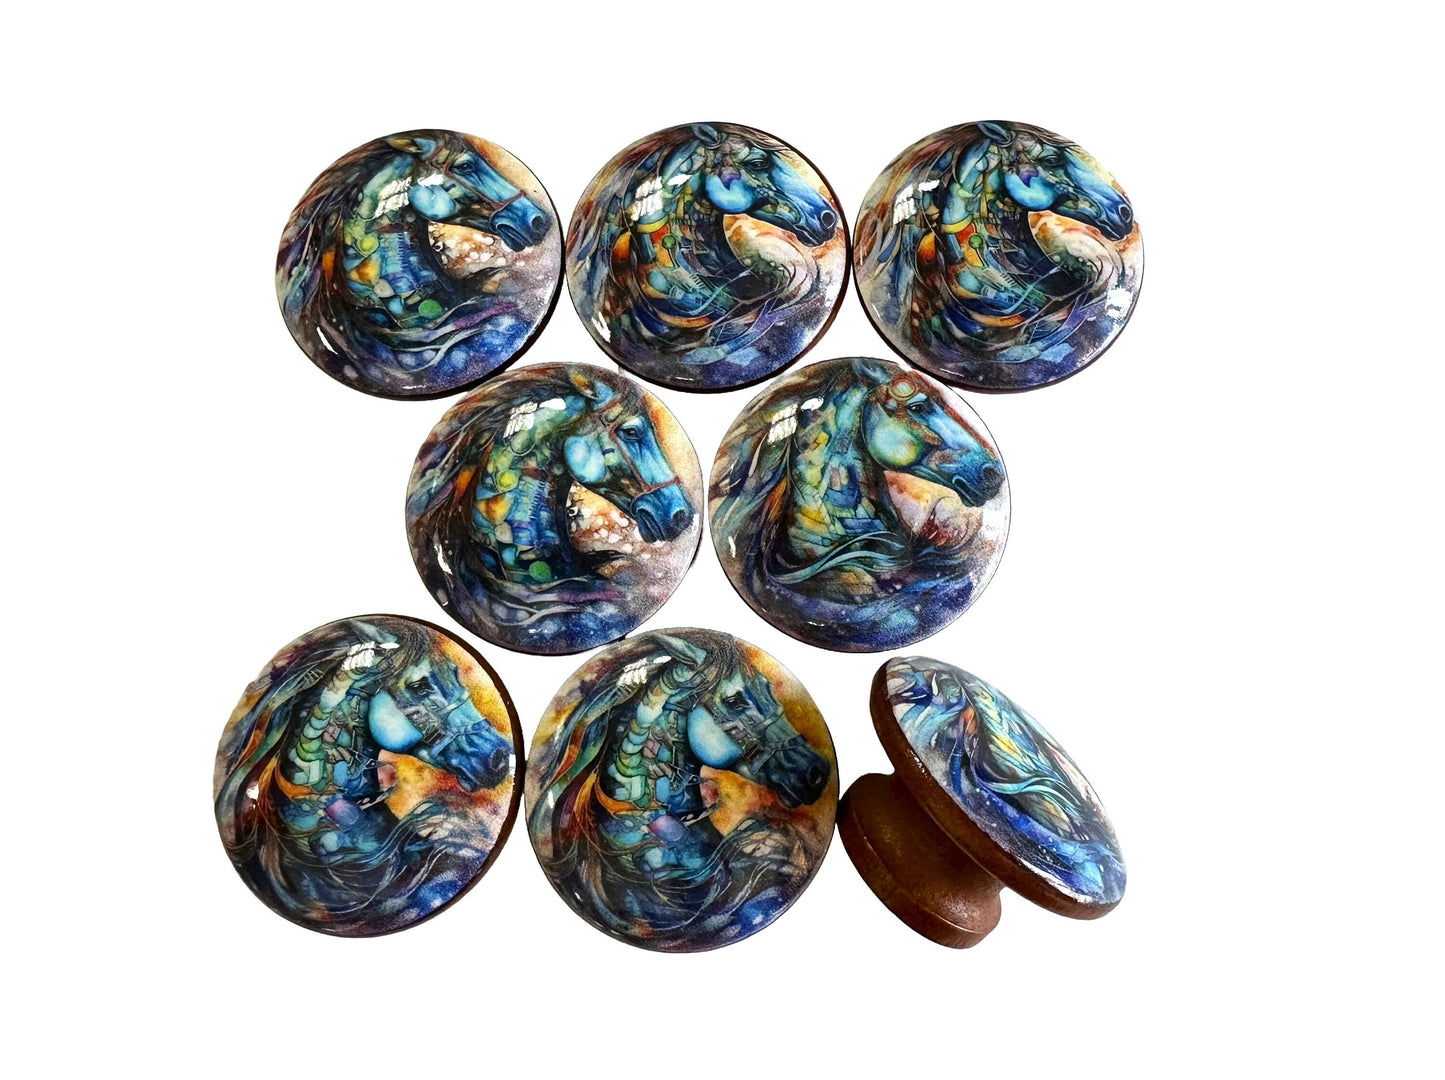 New Release Western Cabinet and Drawer Knobs, Set of 8 Tribal Horses, Cabinet Knobs Drawer Knobs and Pulls, Kitchen Cabinet Knobs,